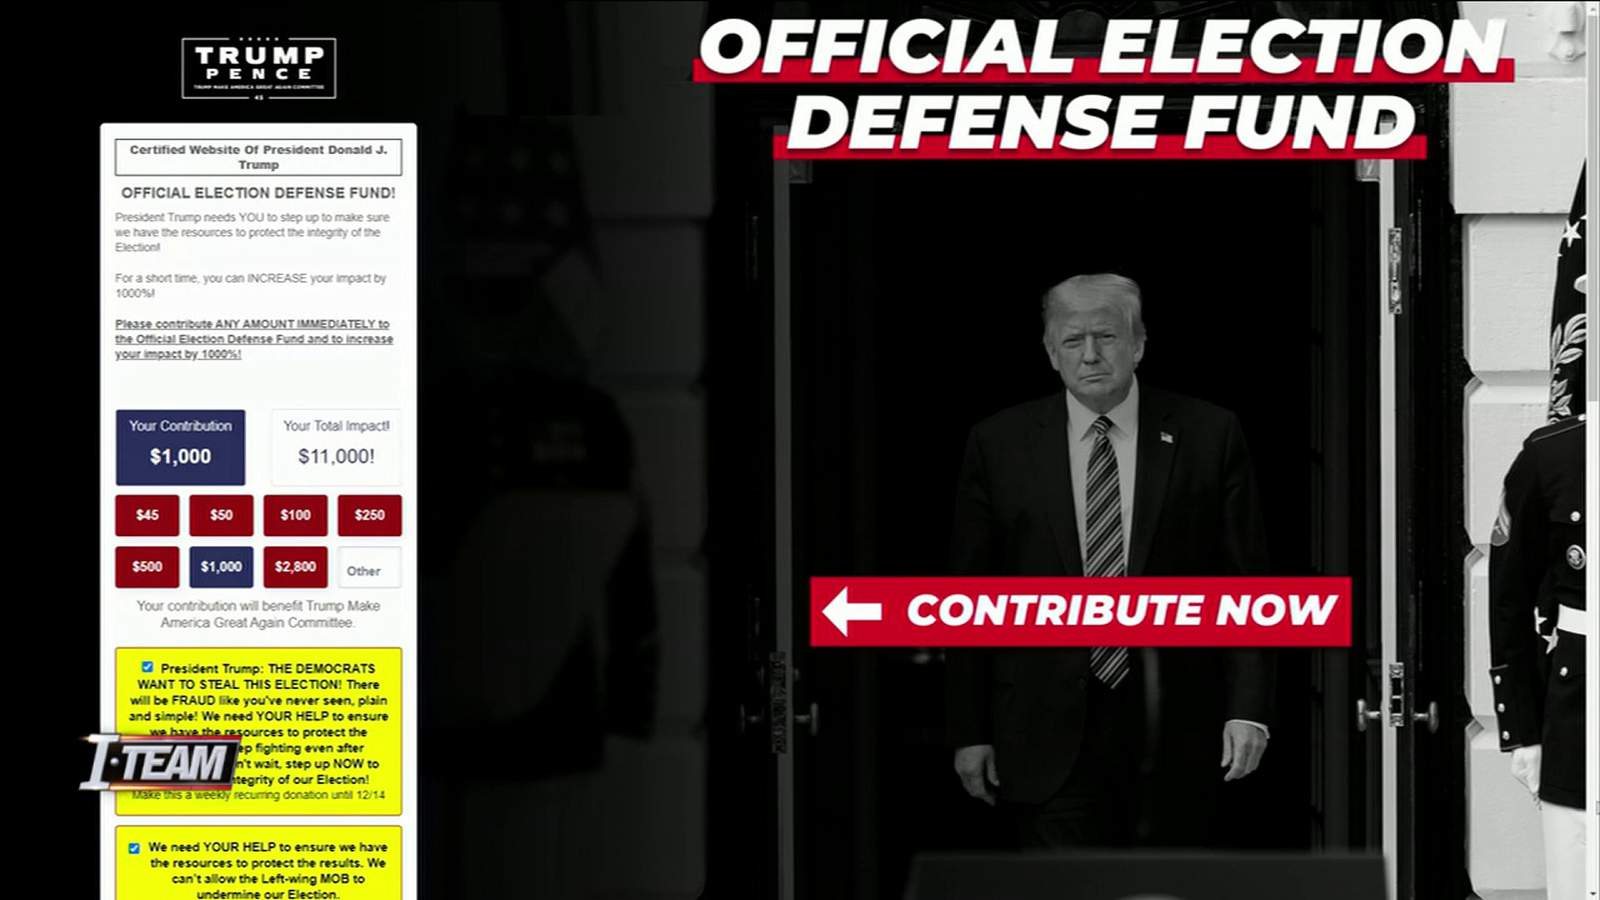 Donations to Trump election defense fund also pay down campaign debt